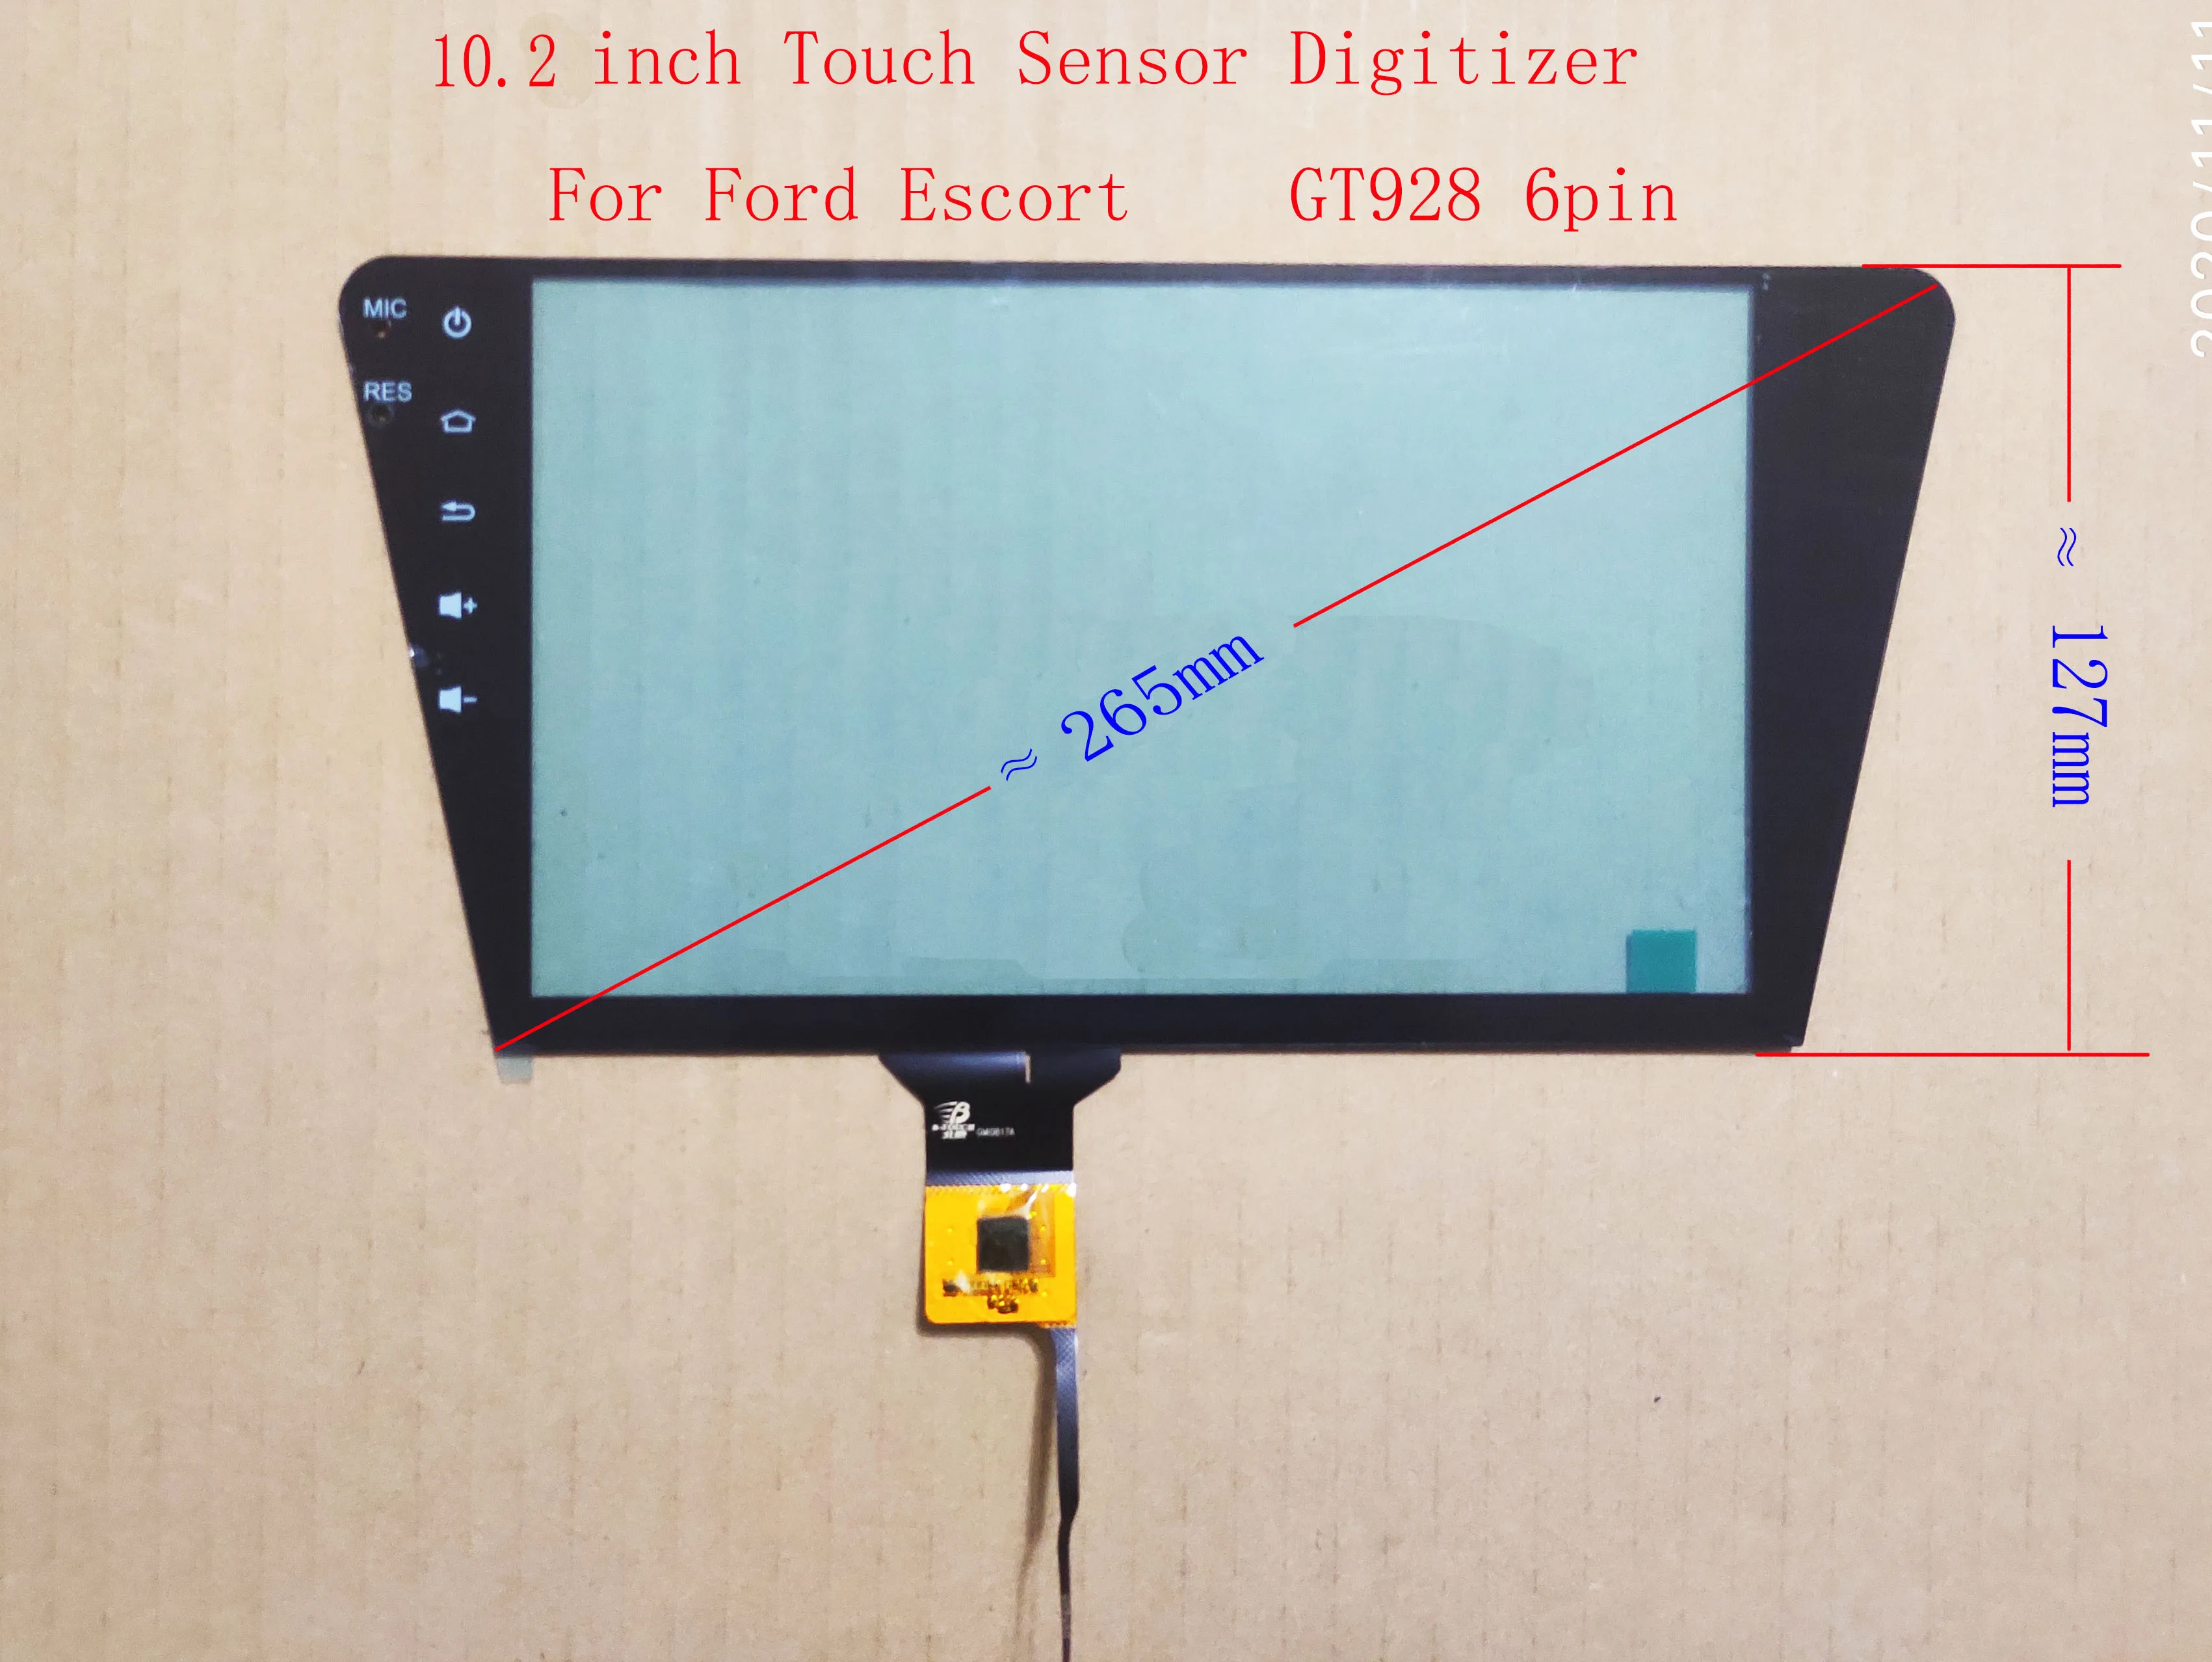 10.2 Inch Capacitive Touch Screen Digitizer Sensor For Ford escort 127mm Hight Width Diagonal 265mm 6pin GT928